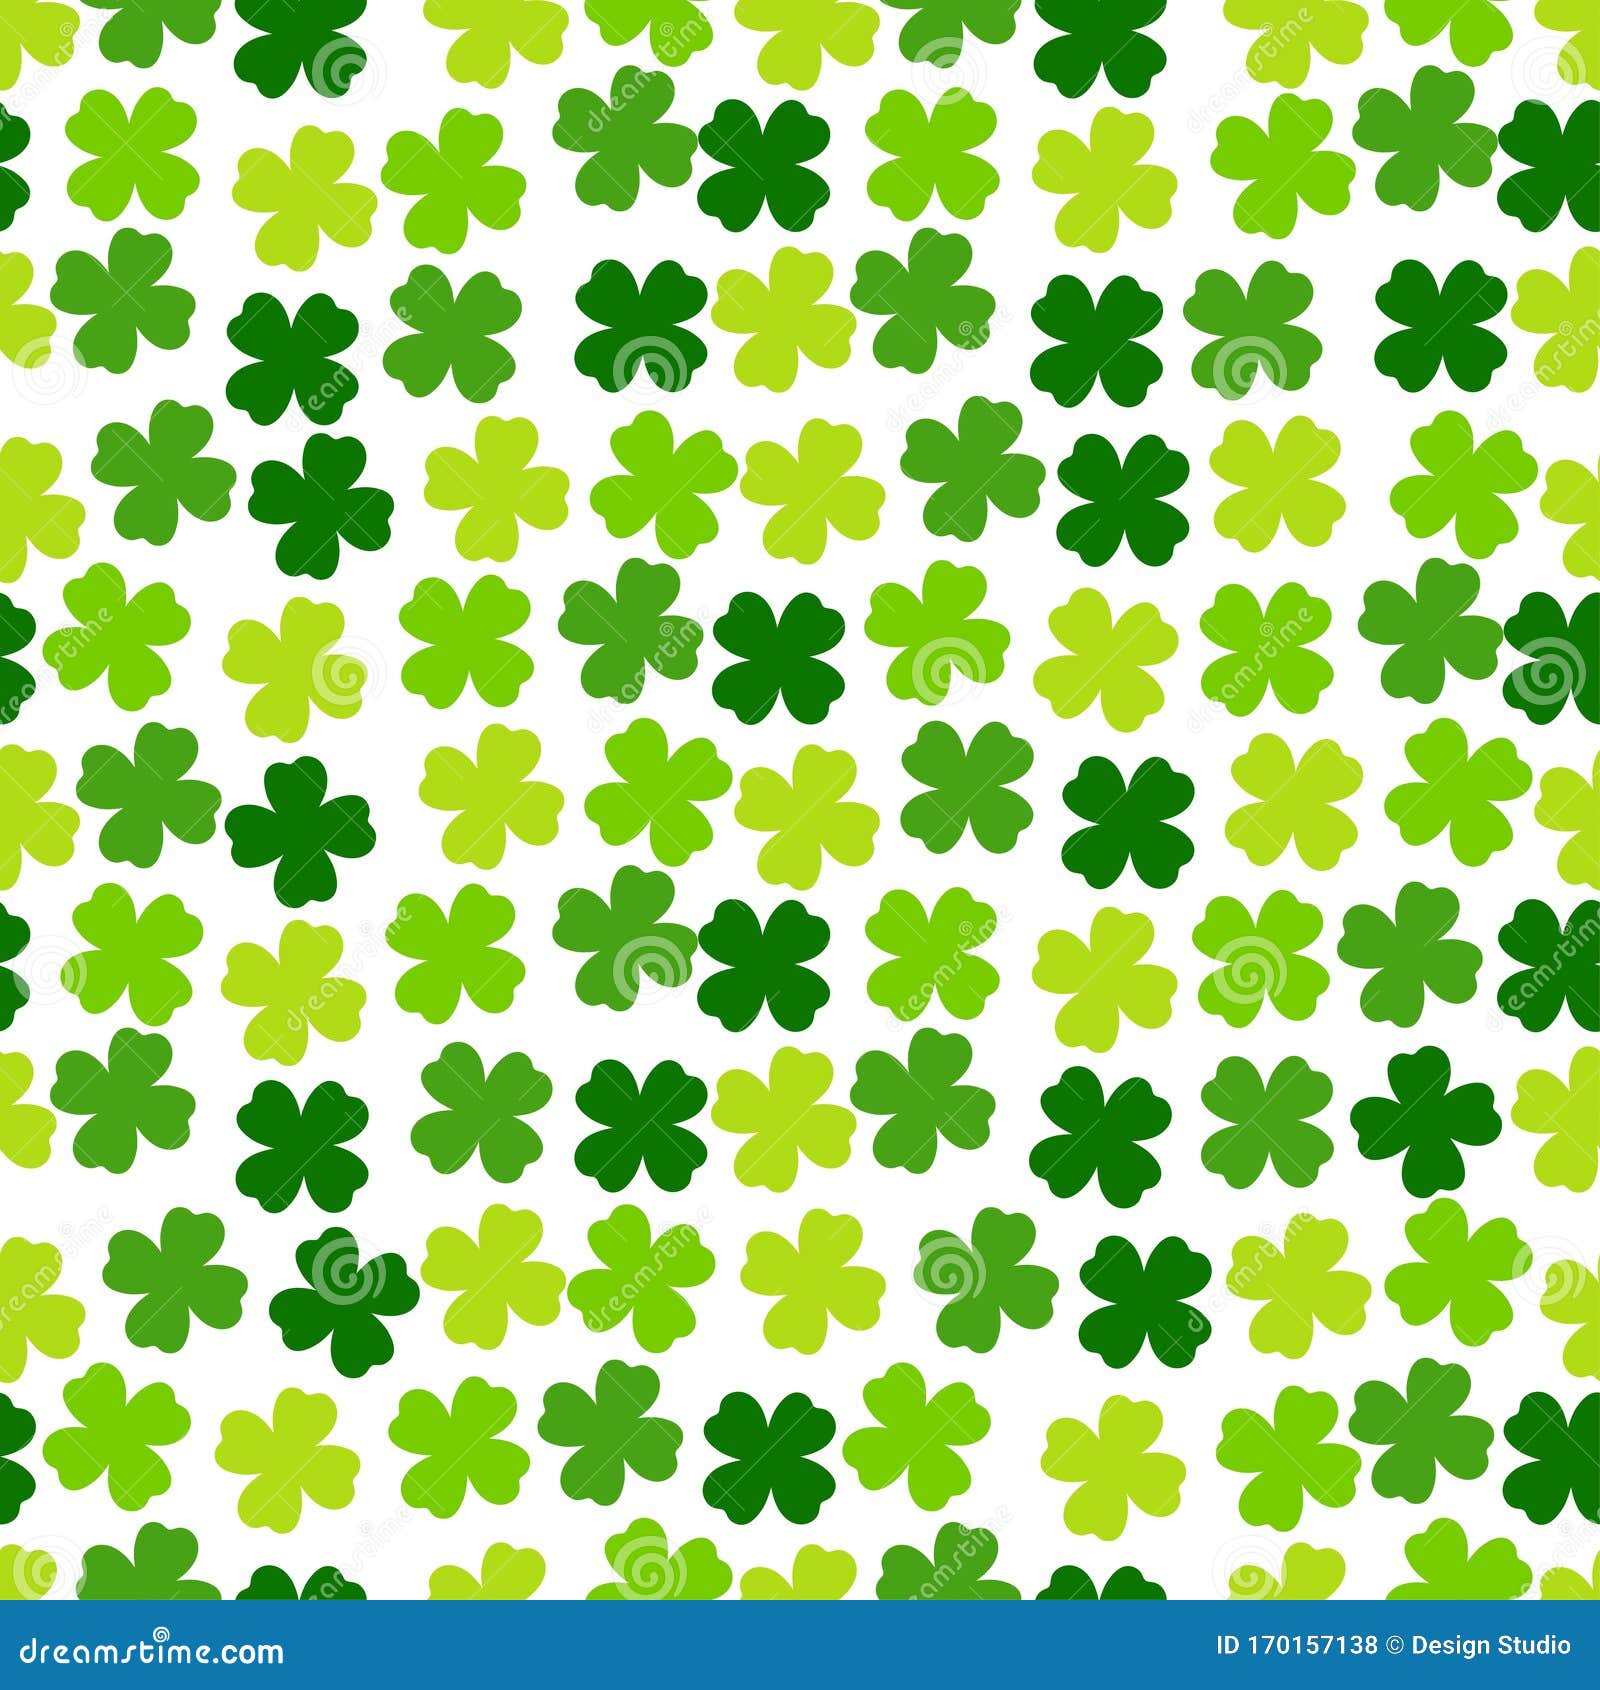 Farmhouse St Patrick's Day Seamless Repeat Pattern for Commercial Use